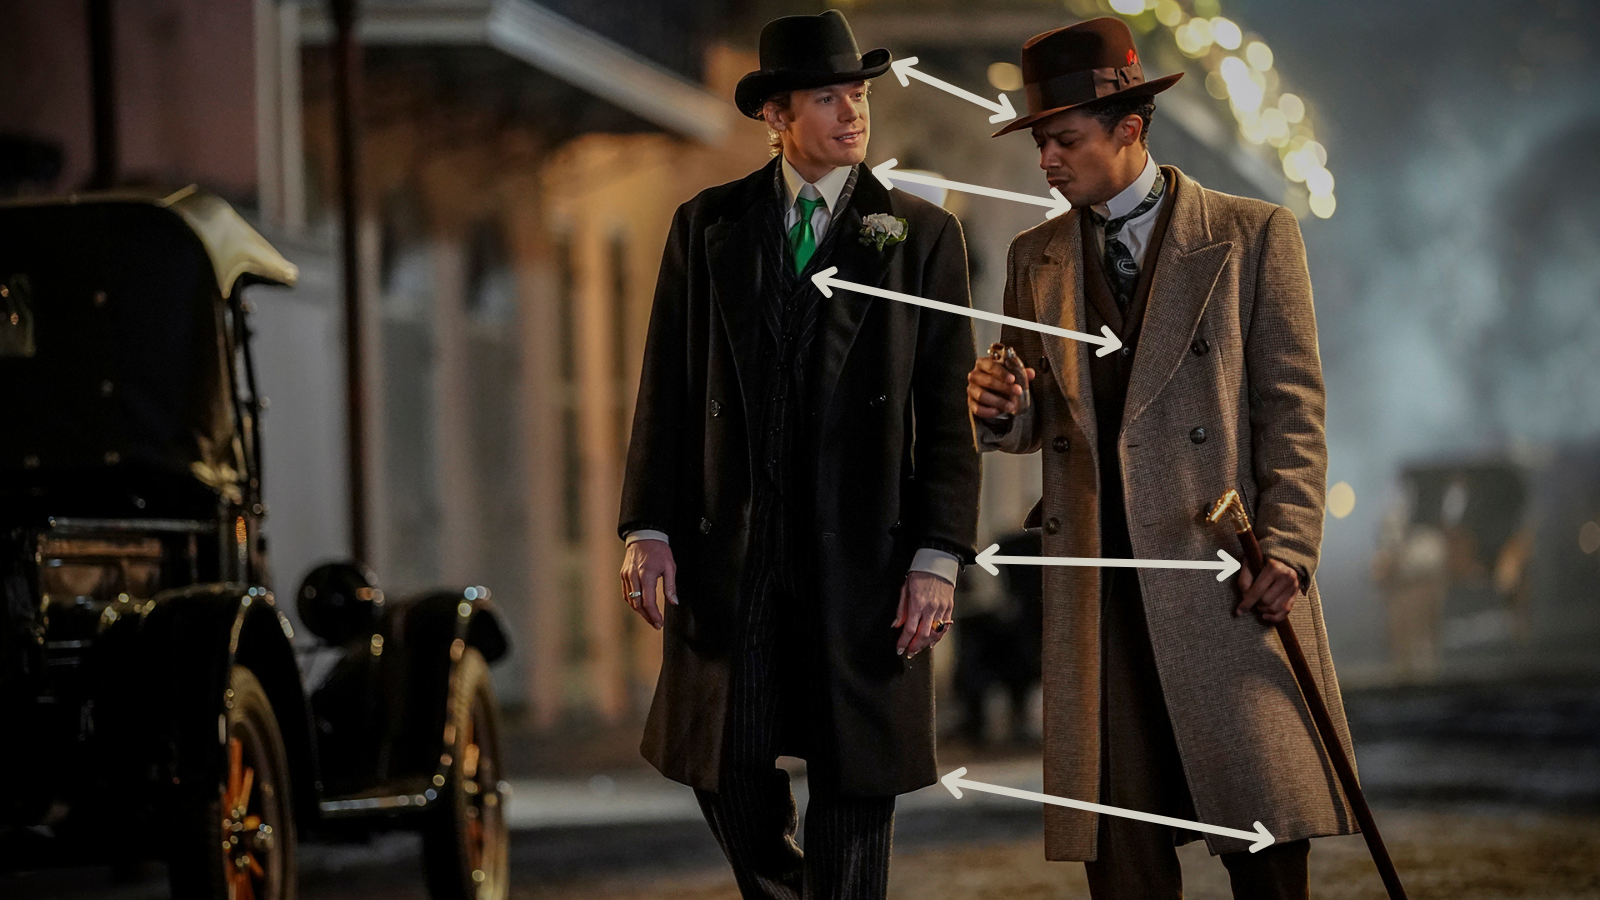 The same picture of Lestat and Louis in the French Quarter, this time with arrows pointing out differences in their outfits.